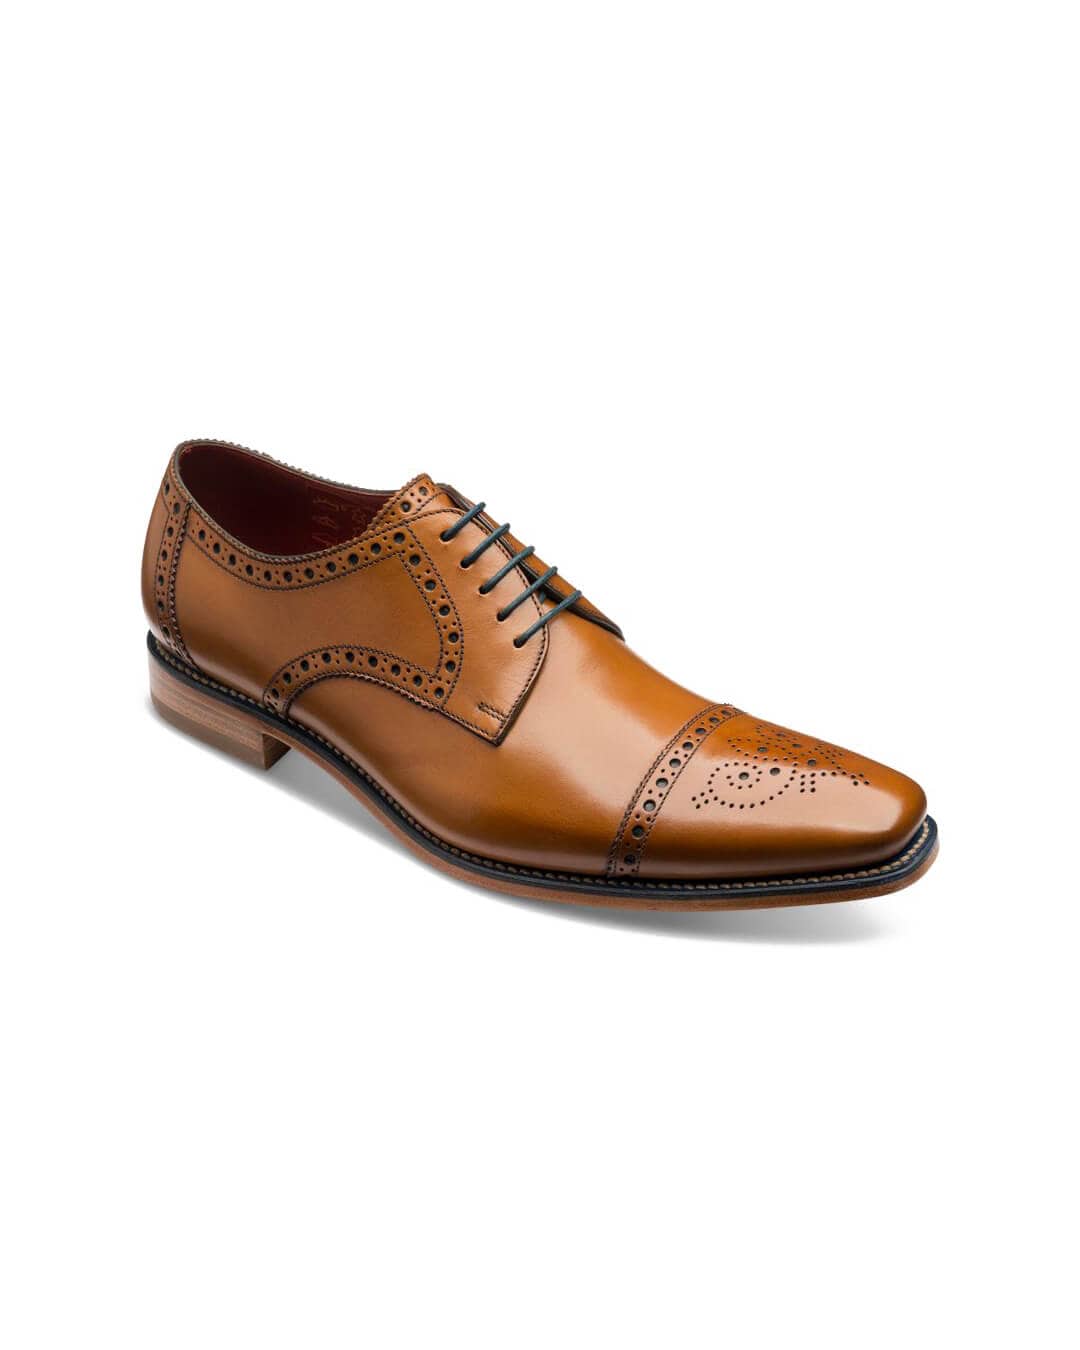 Loake Shoes Loake Brown Foley Derby Brogued Shoes